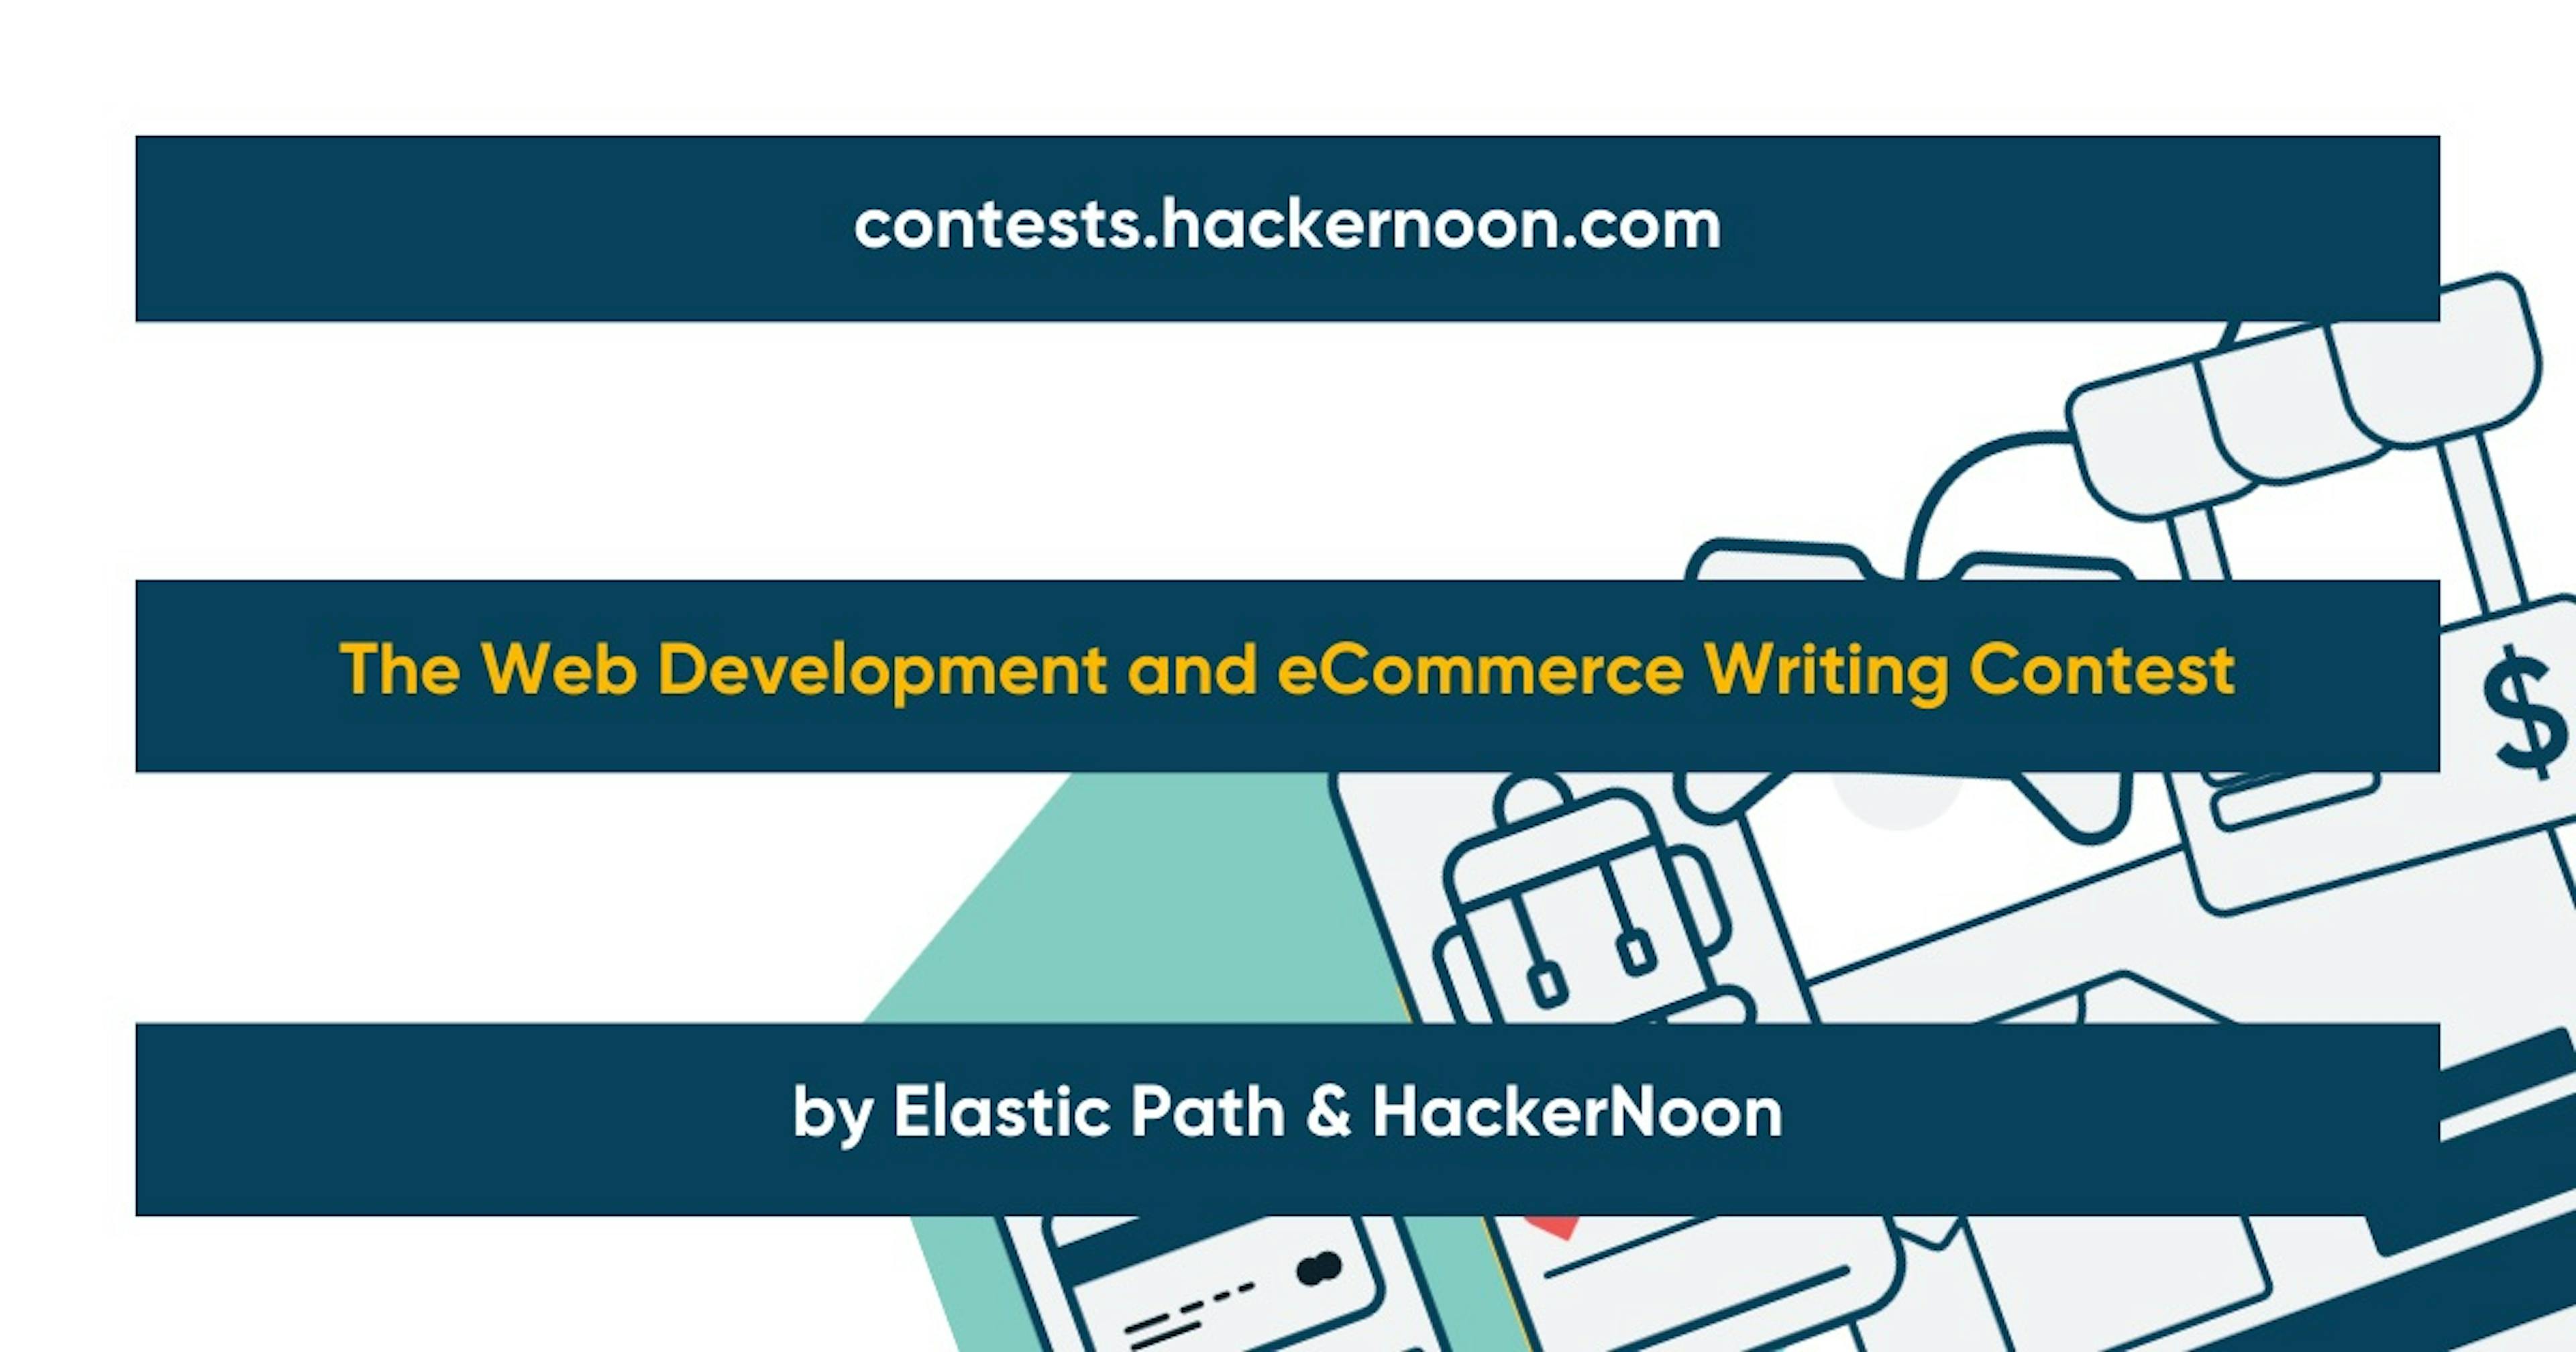 featured image - The Web Development & Ecommerce Writing Contest: Final Results Announced!